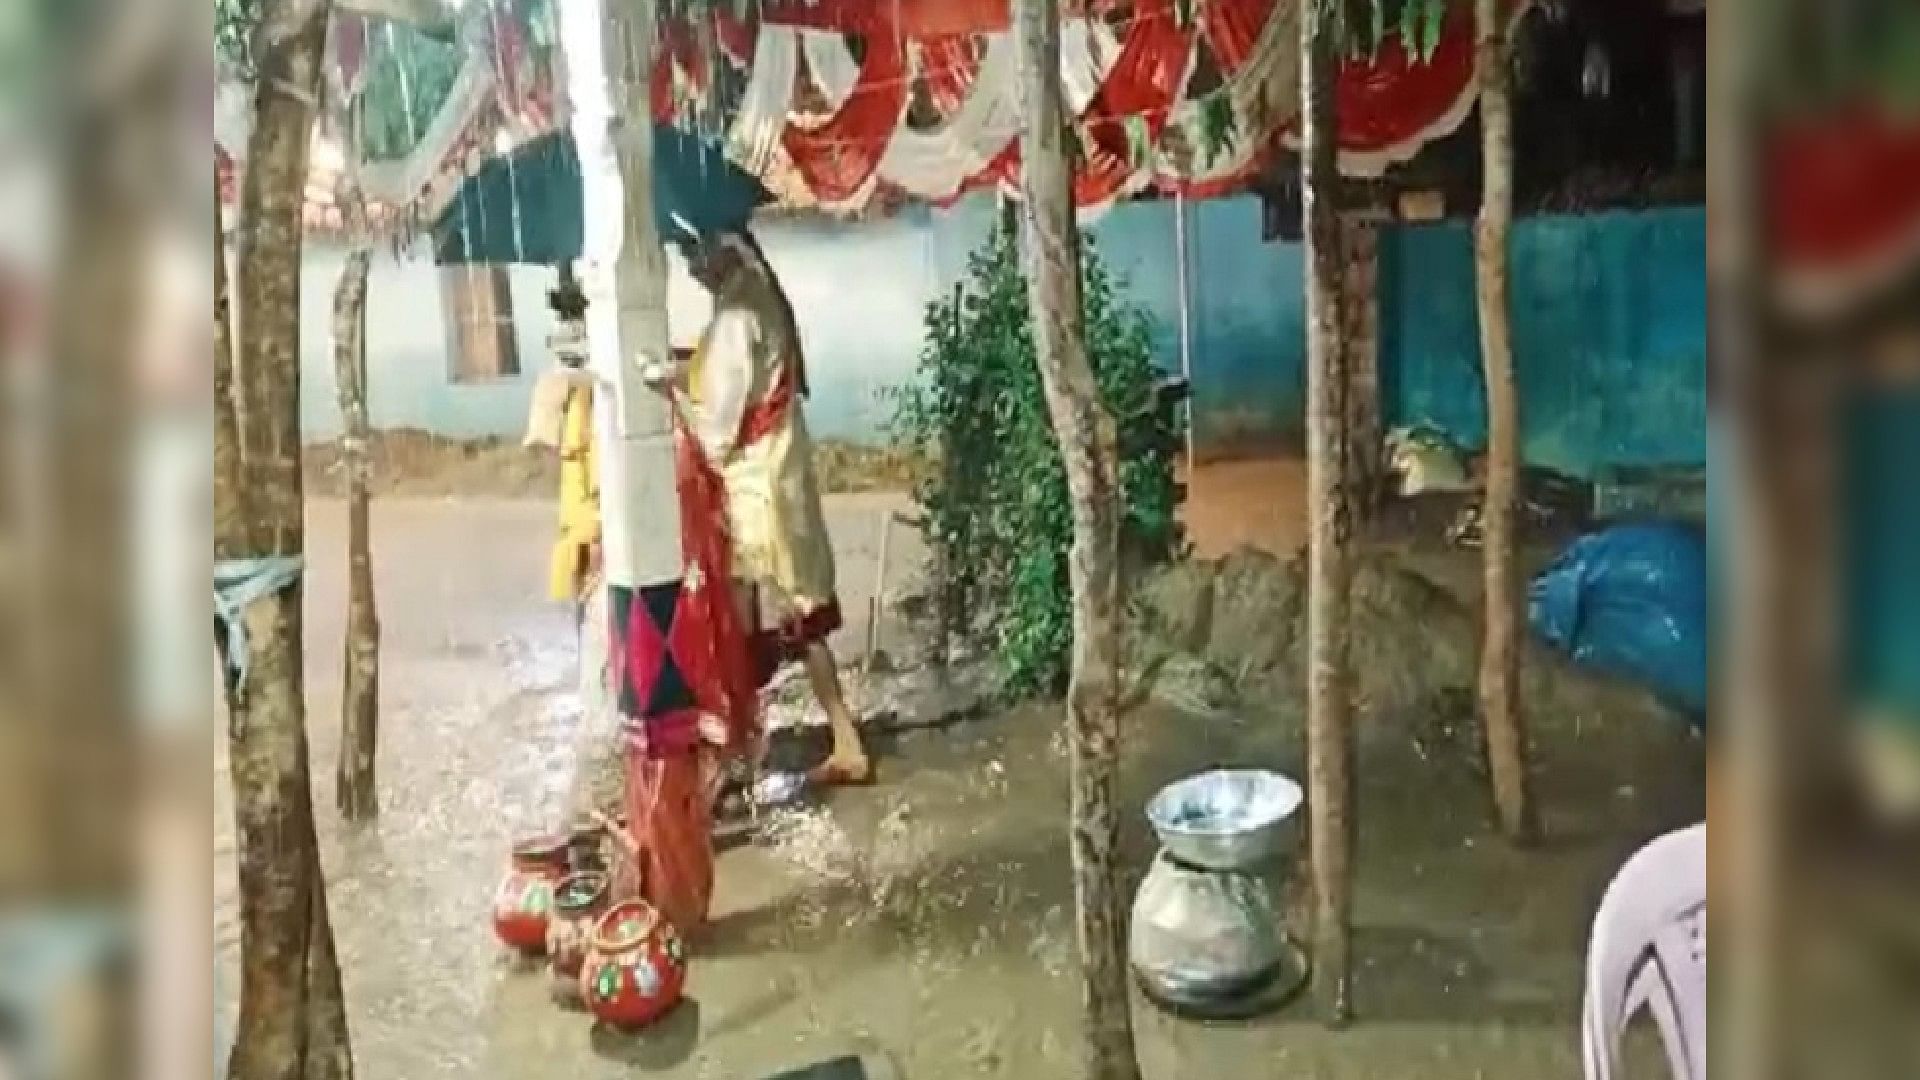 Wedding Video: bride and groom taking pheras carrying an umbrella in heavy rain video goes viral